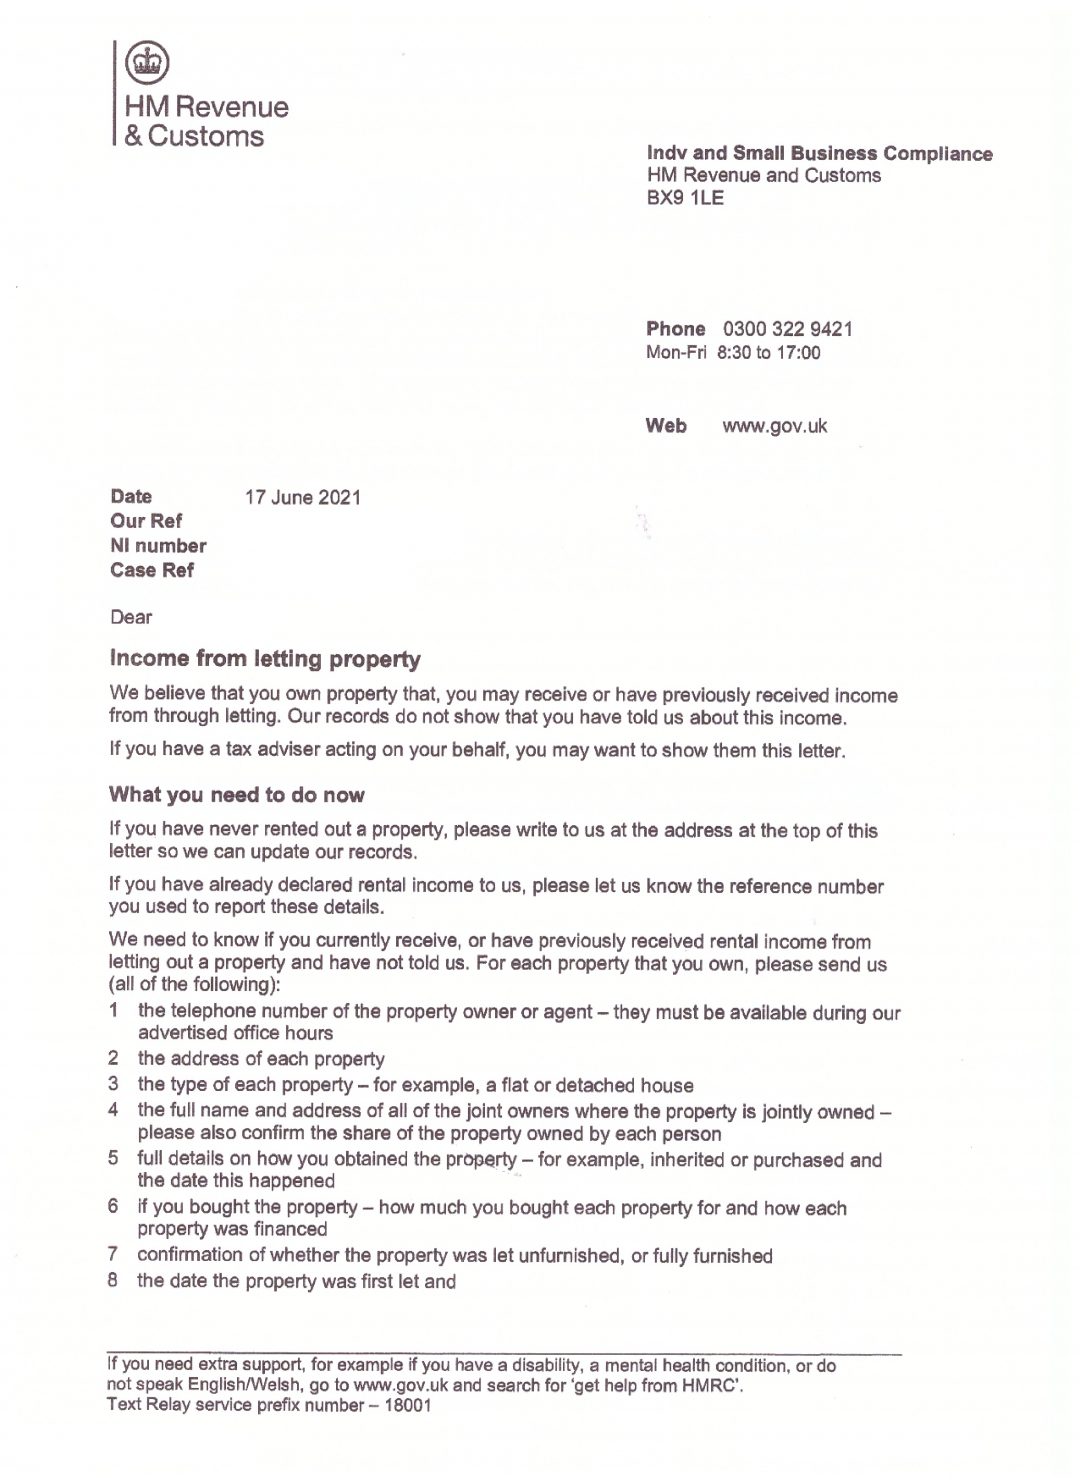 letter-from-hmrc-income-from-letting-property-holland-co-chartered